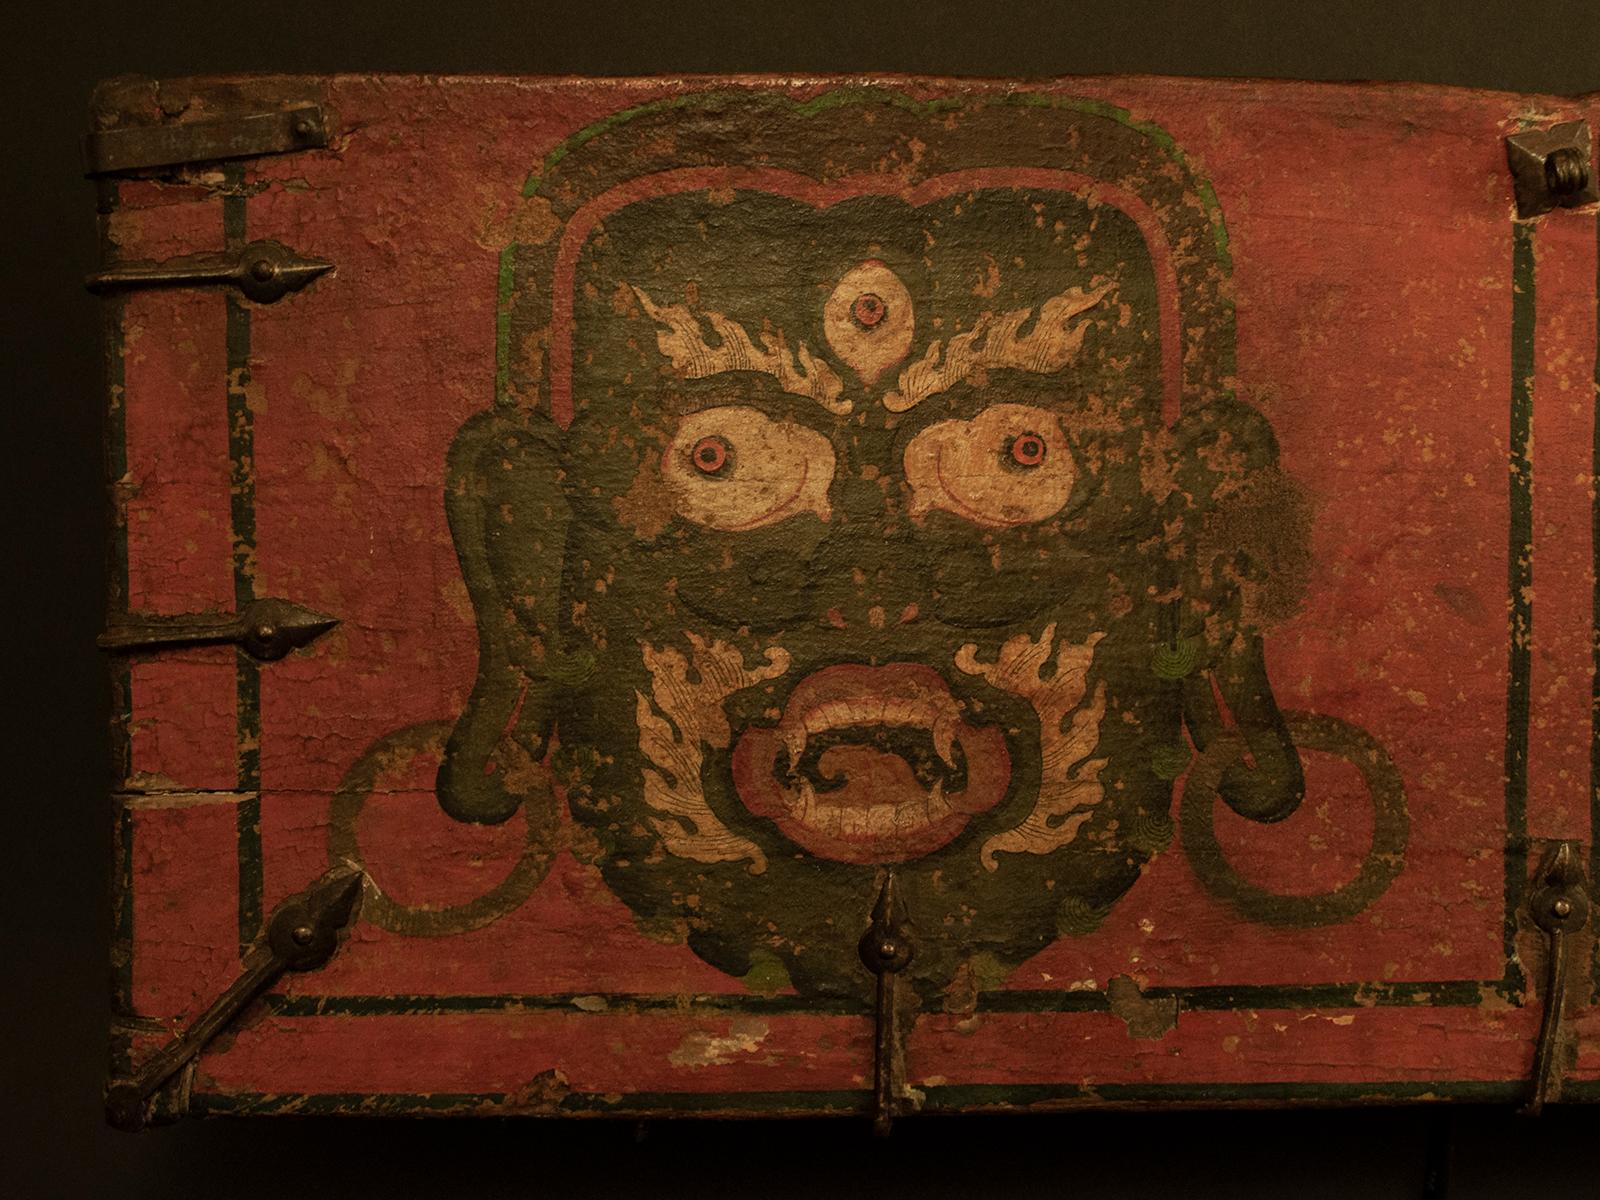 15th century tribal wood panel with Mahakala, Tibet

A dramatic wood panel from the front of an early Tibetan chest, with all the original mineral pigments and iron hardware. Mahakala is a guardian deity of Tibetan Buddhism and is often